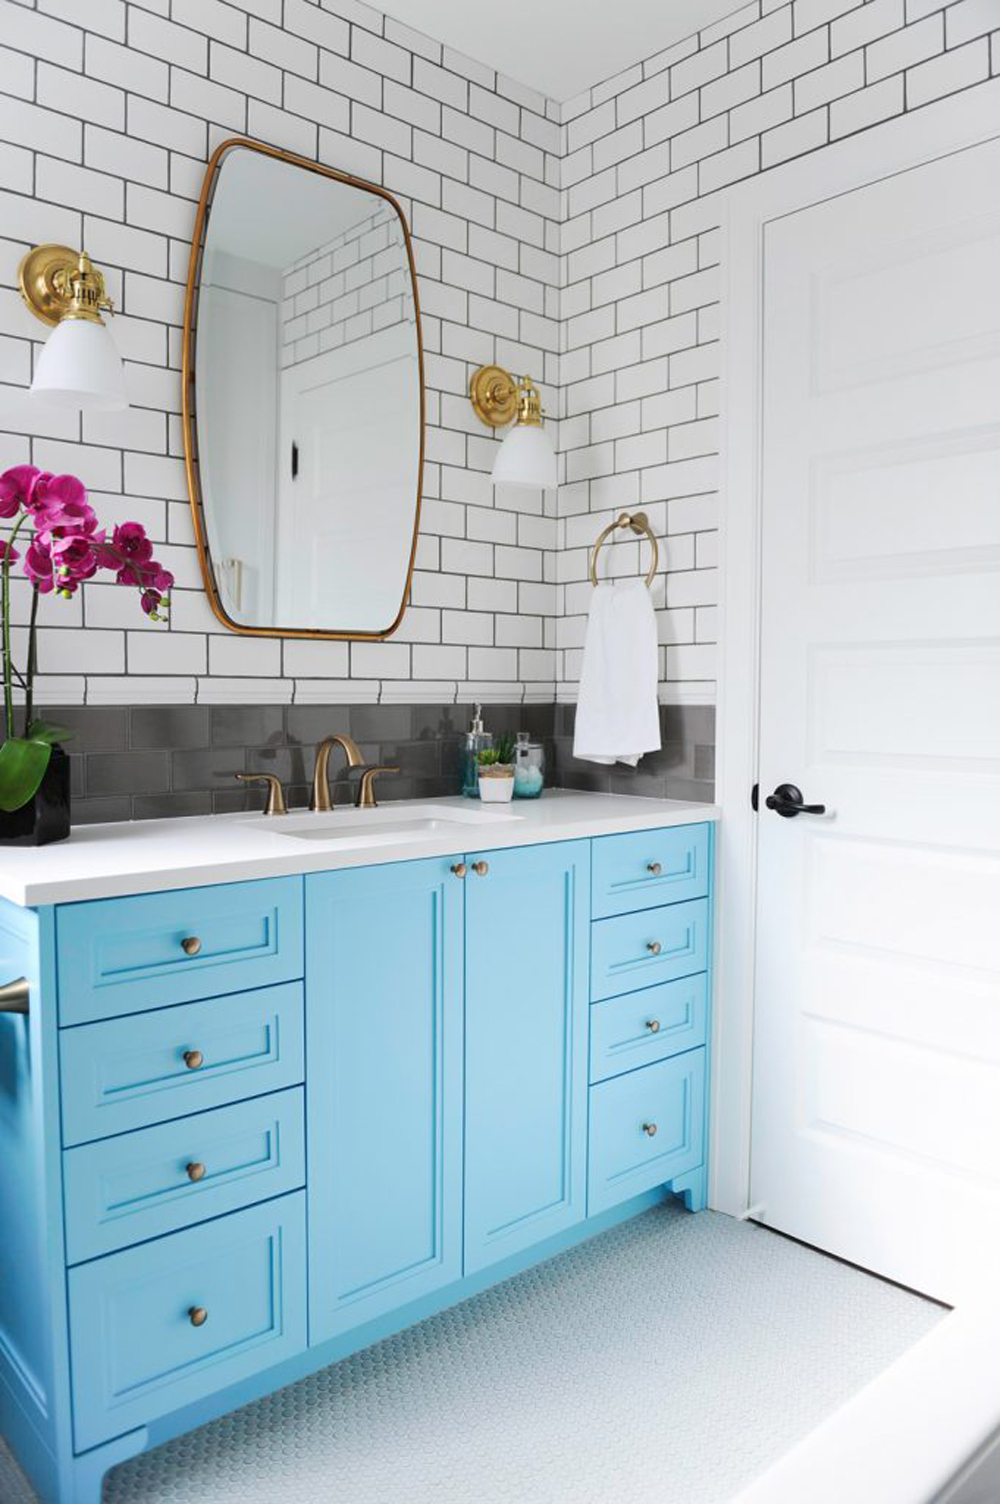 A pristine blue and white bathroom with subway tiles on the wall